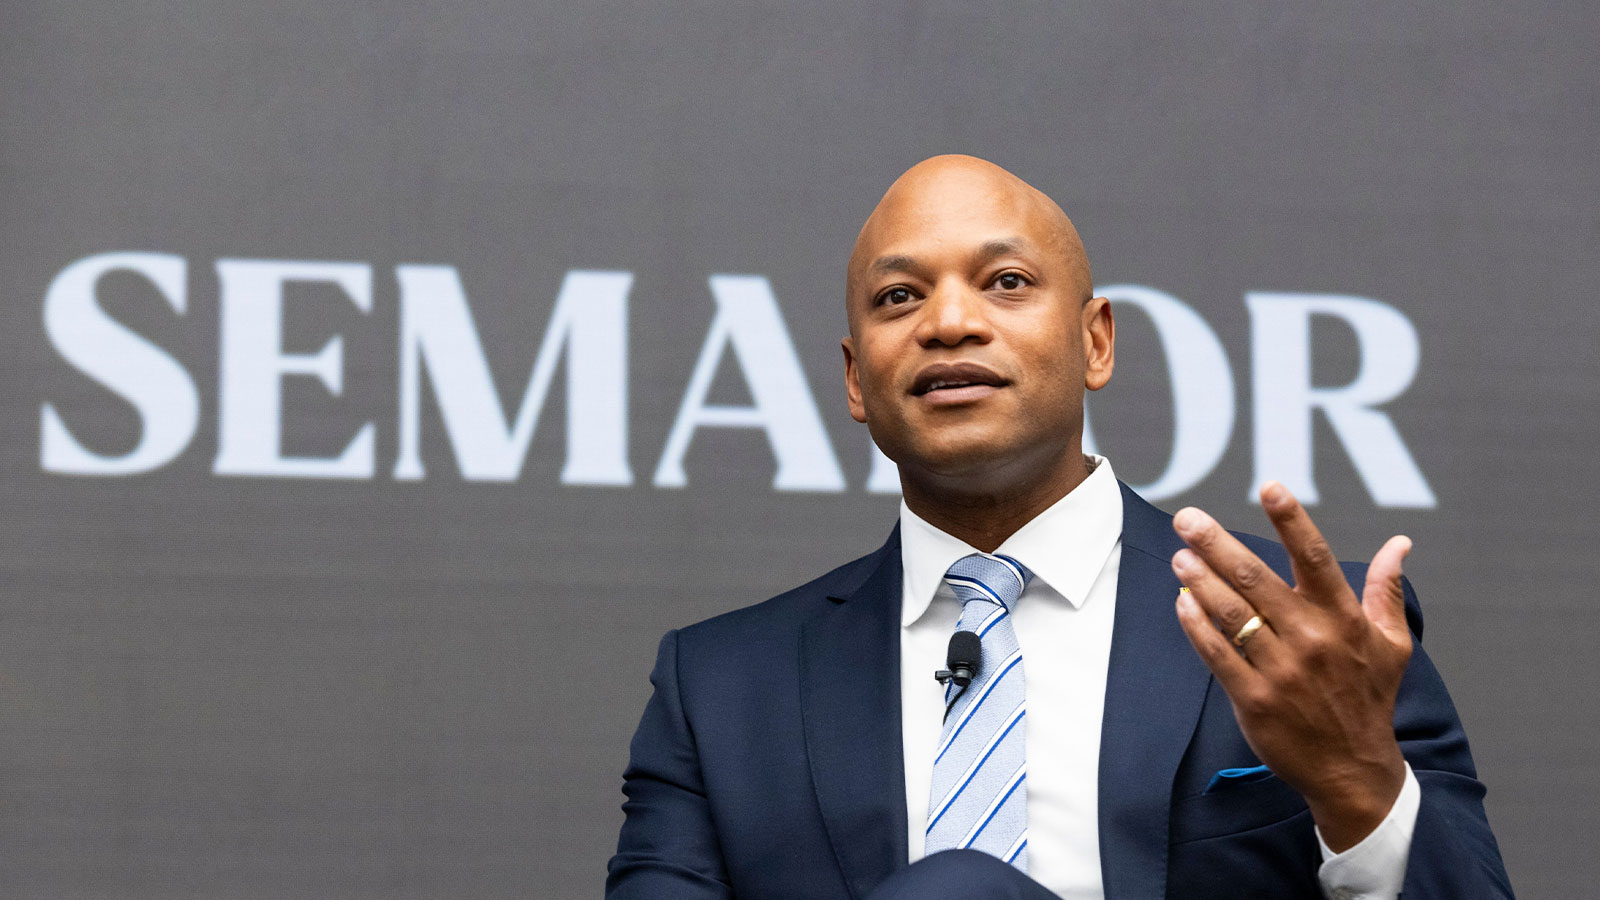 Governor Wes Moore credits Biden for Maryland growth